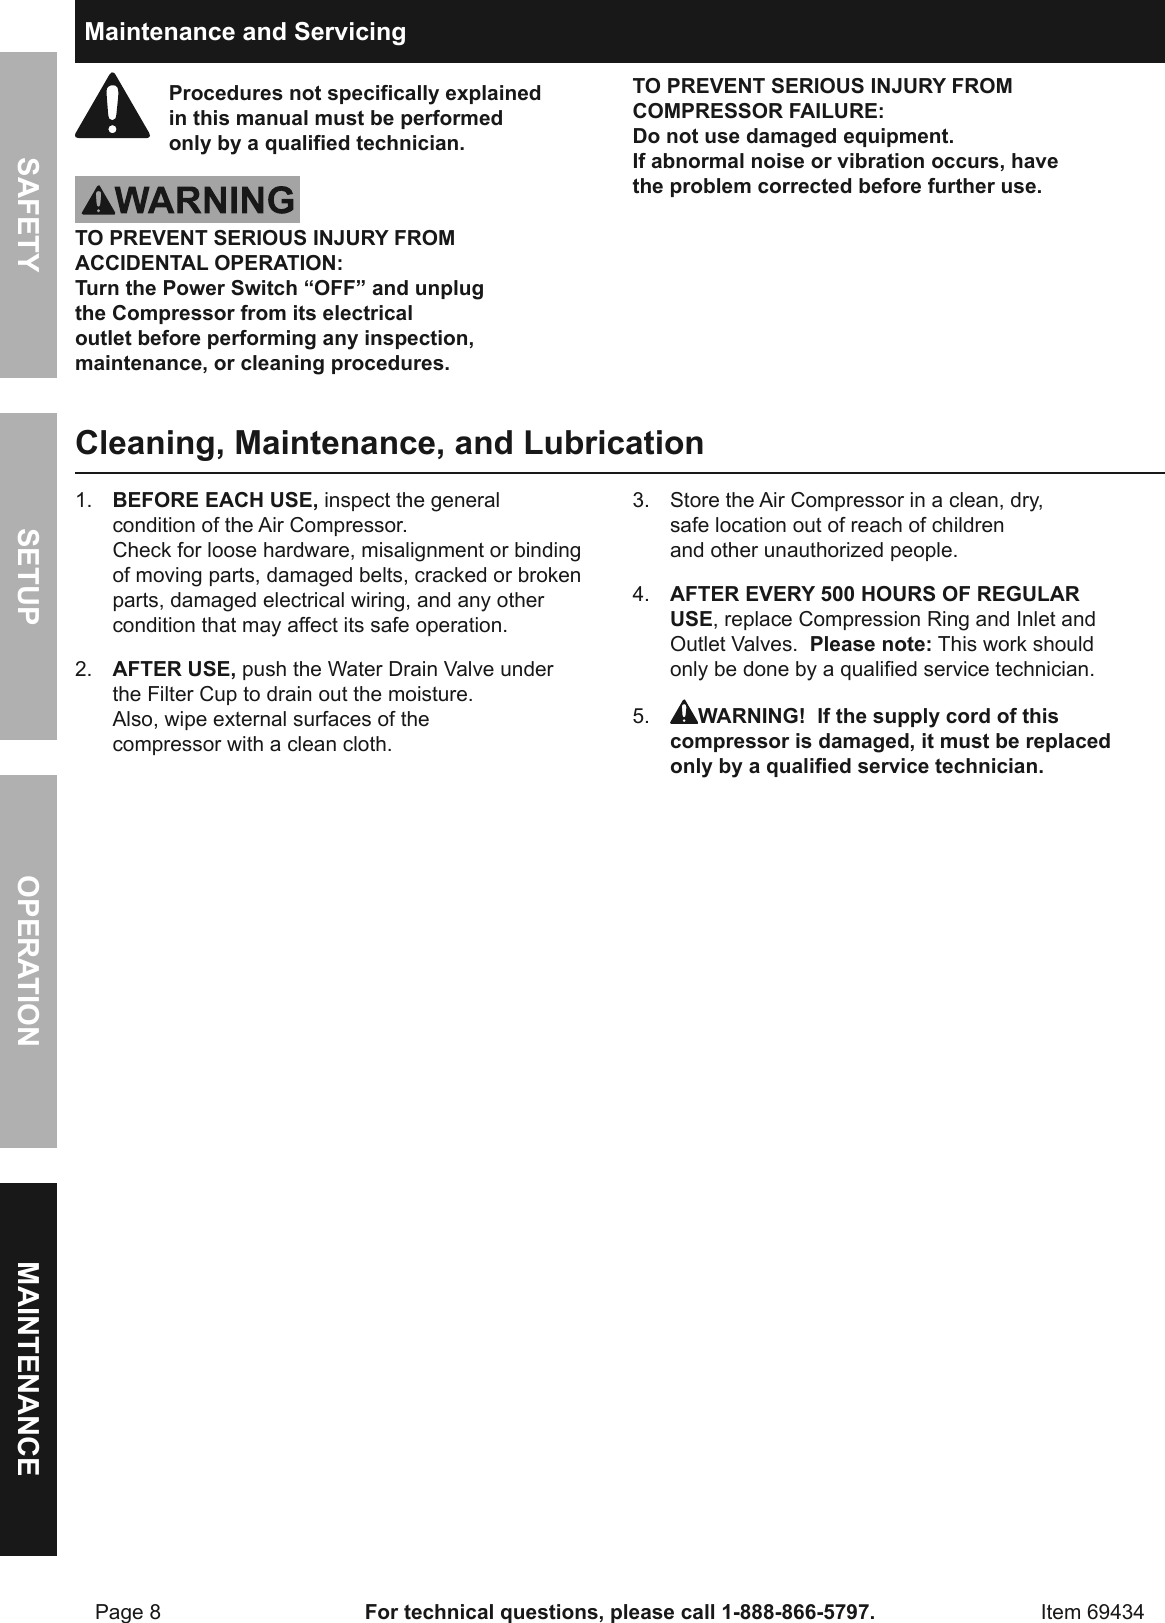 Page 8 of 12 - Manual For The 69434 1/5 Horsepower, 58 PSI Airbrush Compressor And Kit